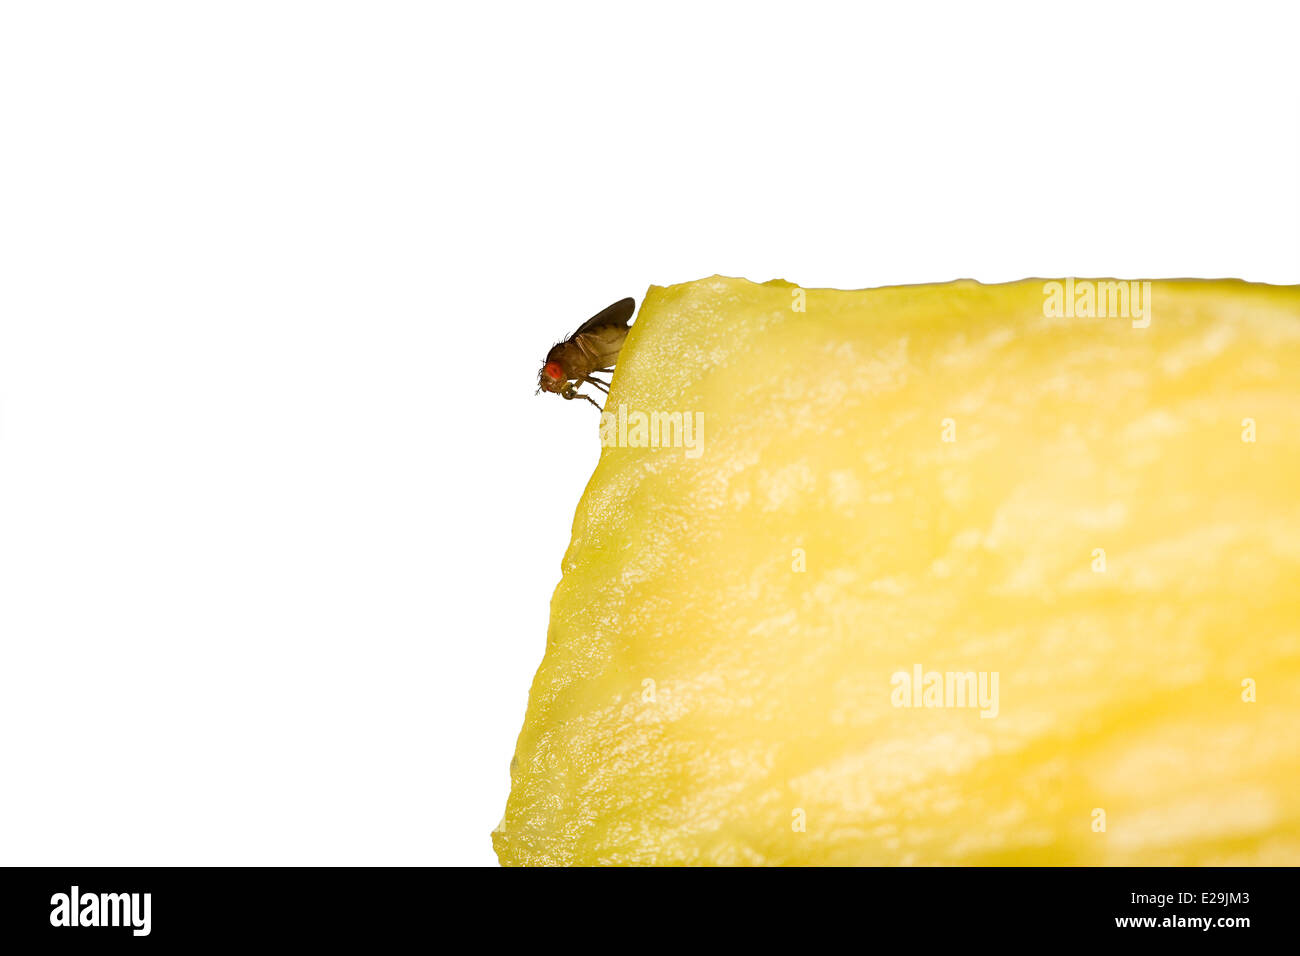 Cut Out. Common Fruit Fly (Drosophila melanogaster) on a yellow pineapple chunk on white background Stock Photo